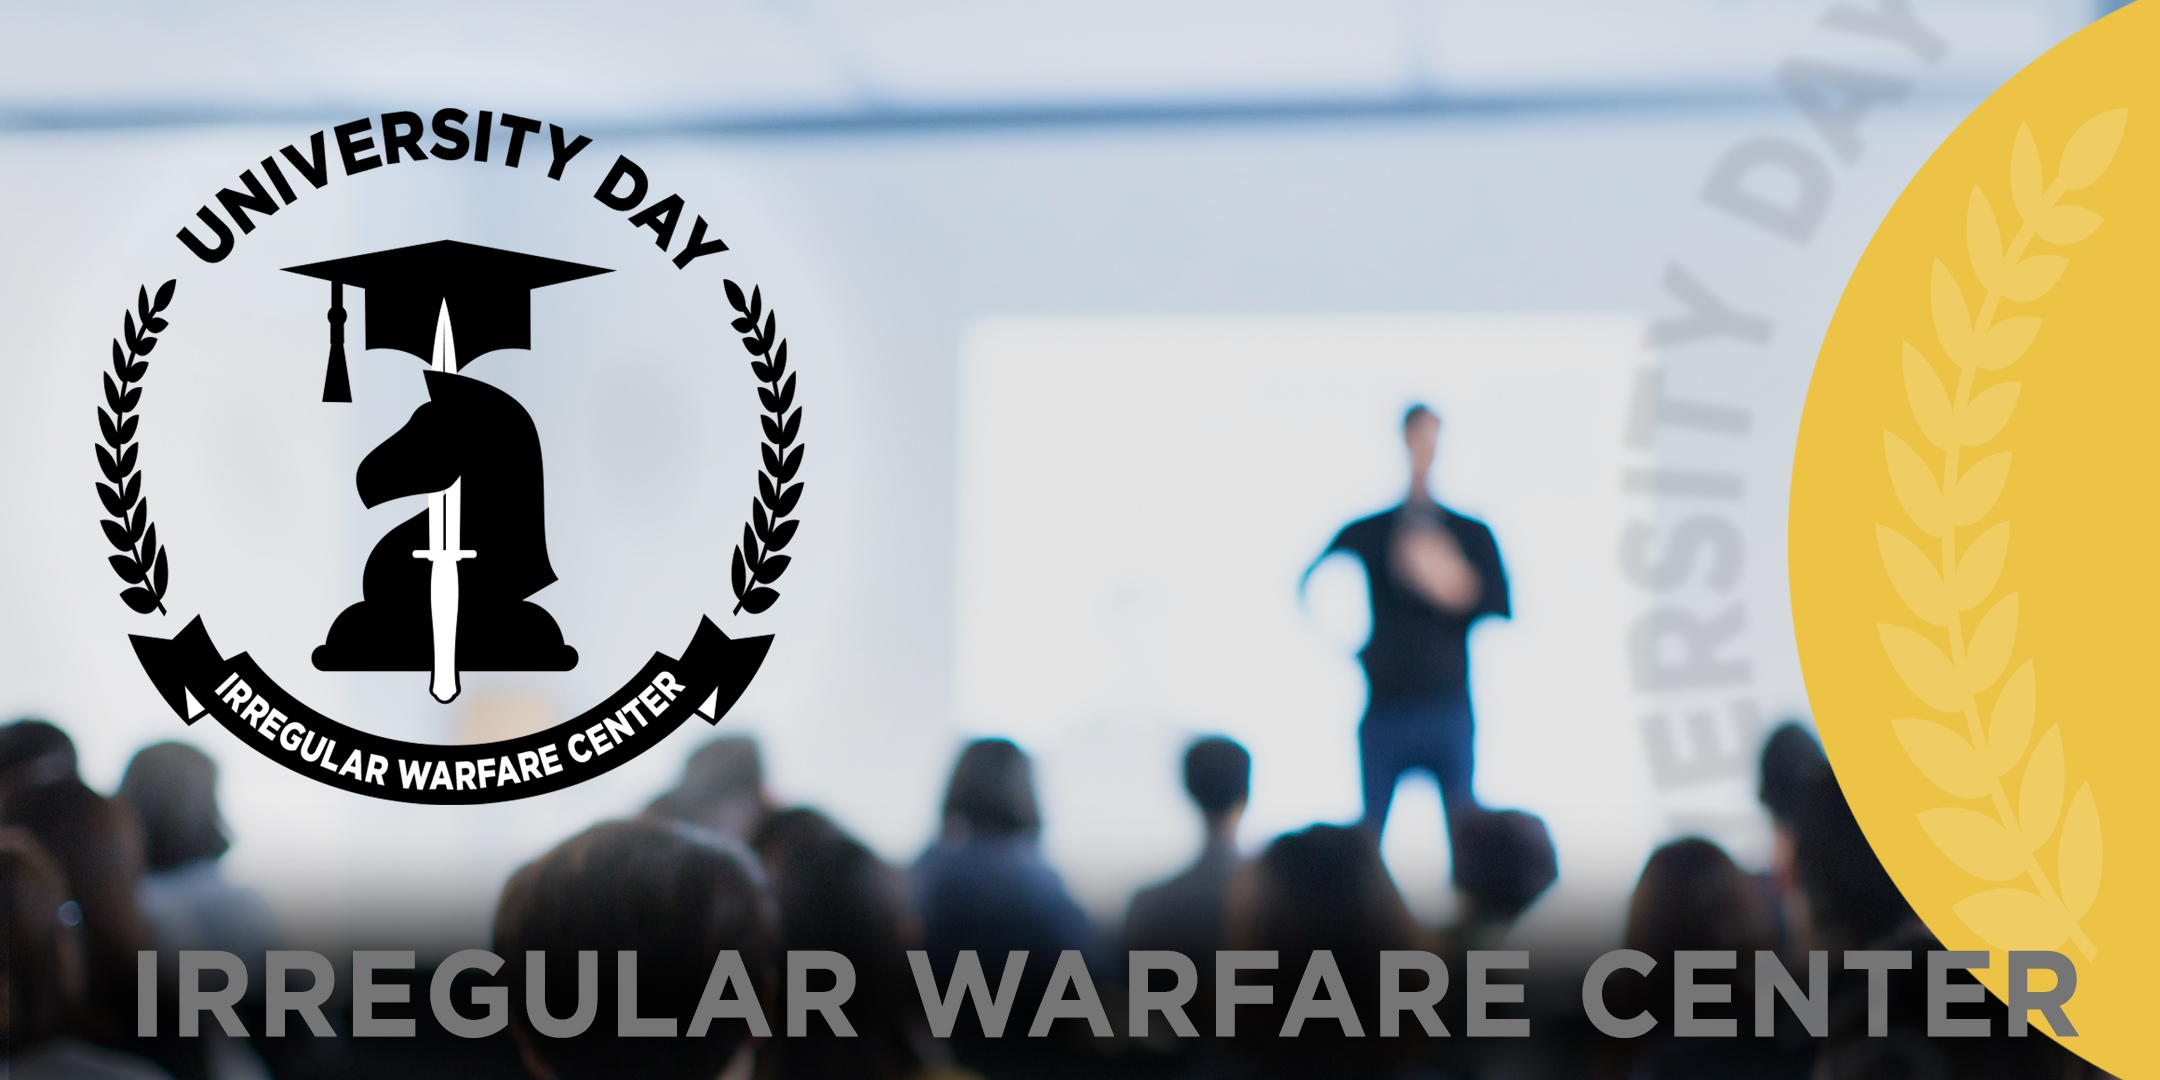 The Defense Security Cooperation University and the Irregular Warfare Center To Host University Days Event